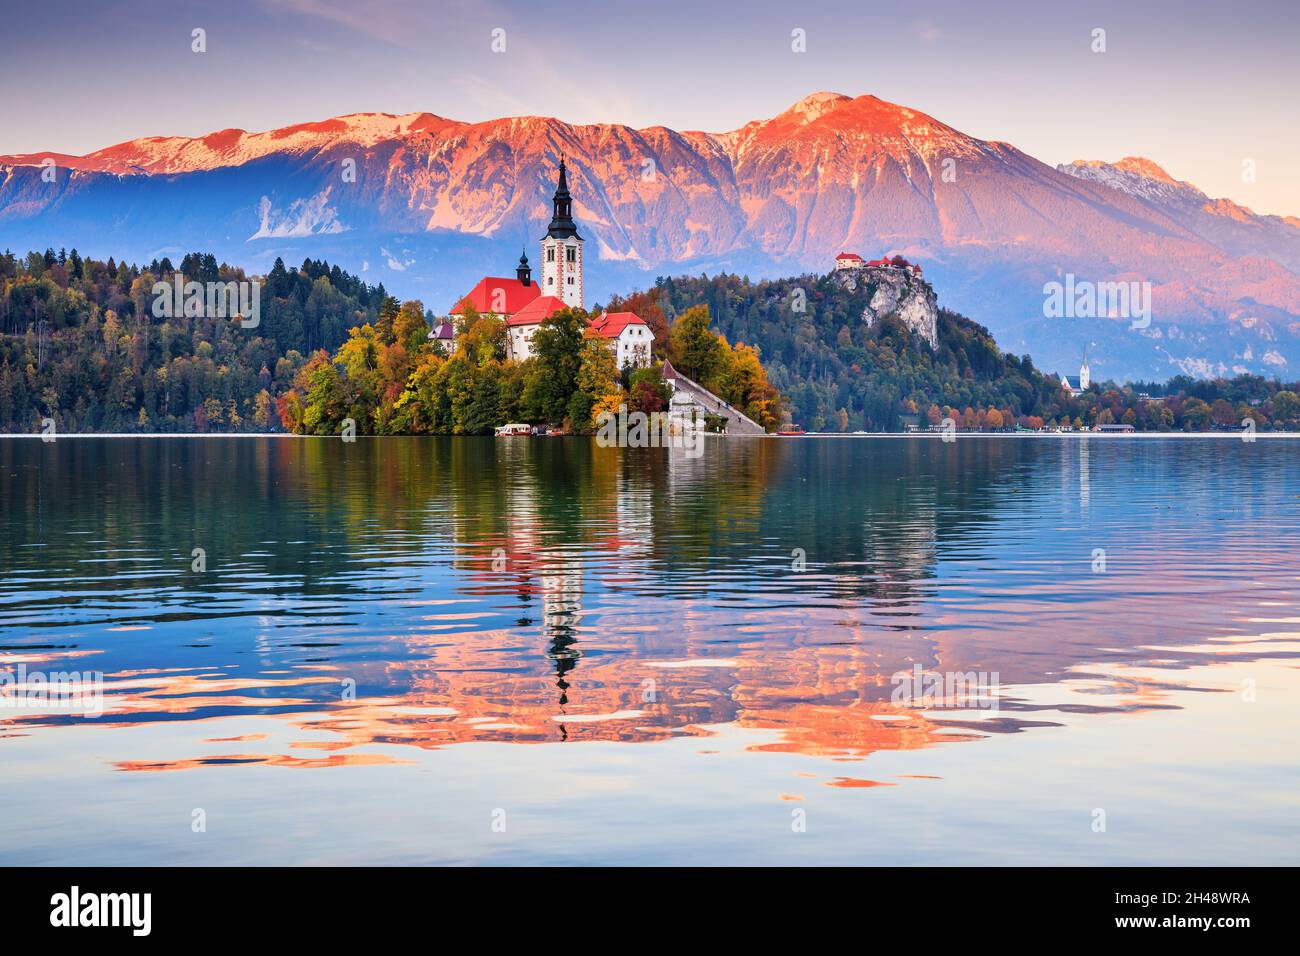 Lake Bled, Slovenia. Sunset at Lake Bled with famous Bled Island and historic Bled Castle in the background. Stock Photo